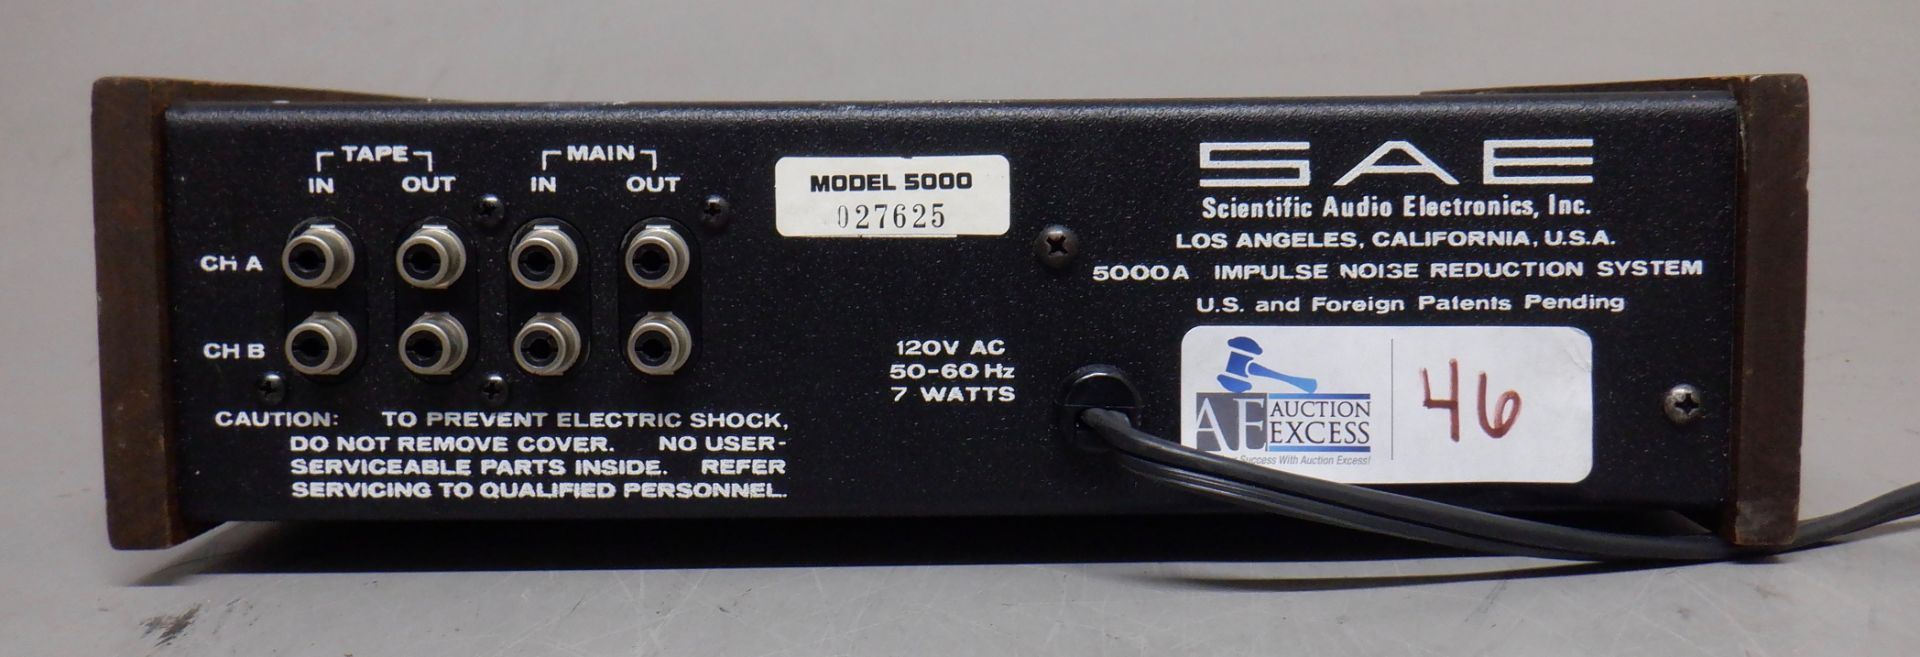 SAE 5000A IMPULSE NOISE REDUCTION SYSTEM - Image 2 of 2